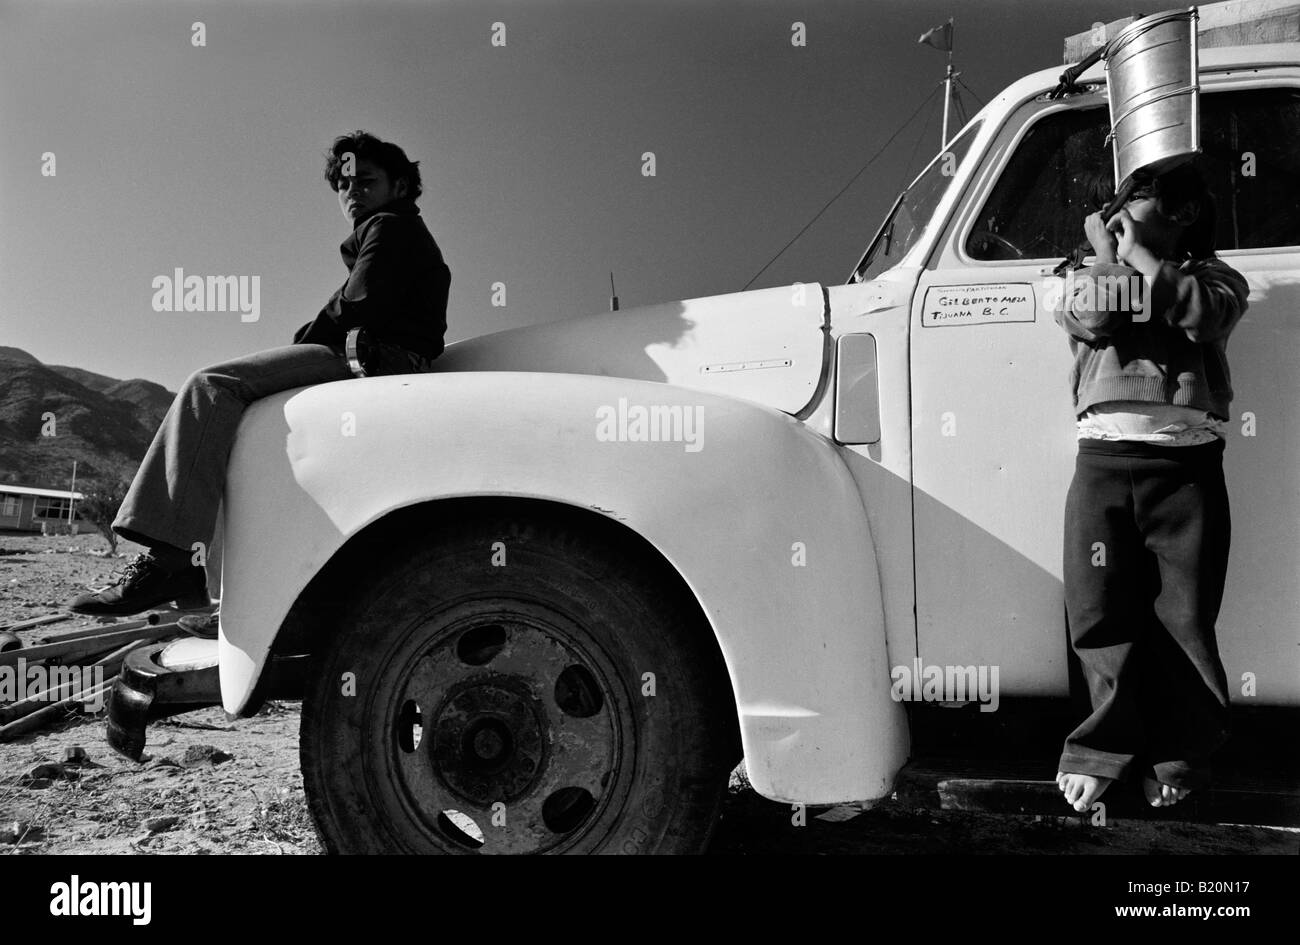 Boys playing on old truck Bahia de los Angeles Mexico Stock Photo